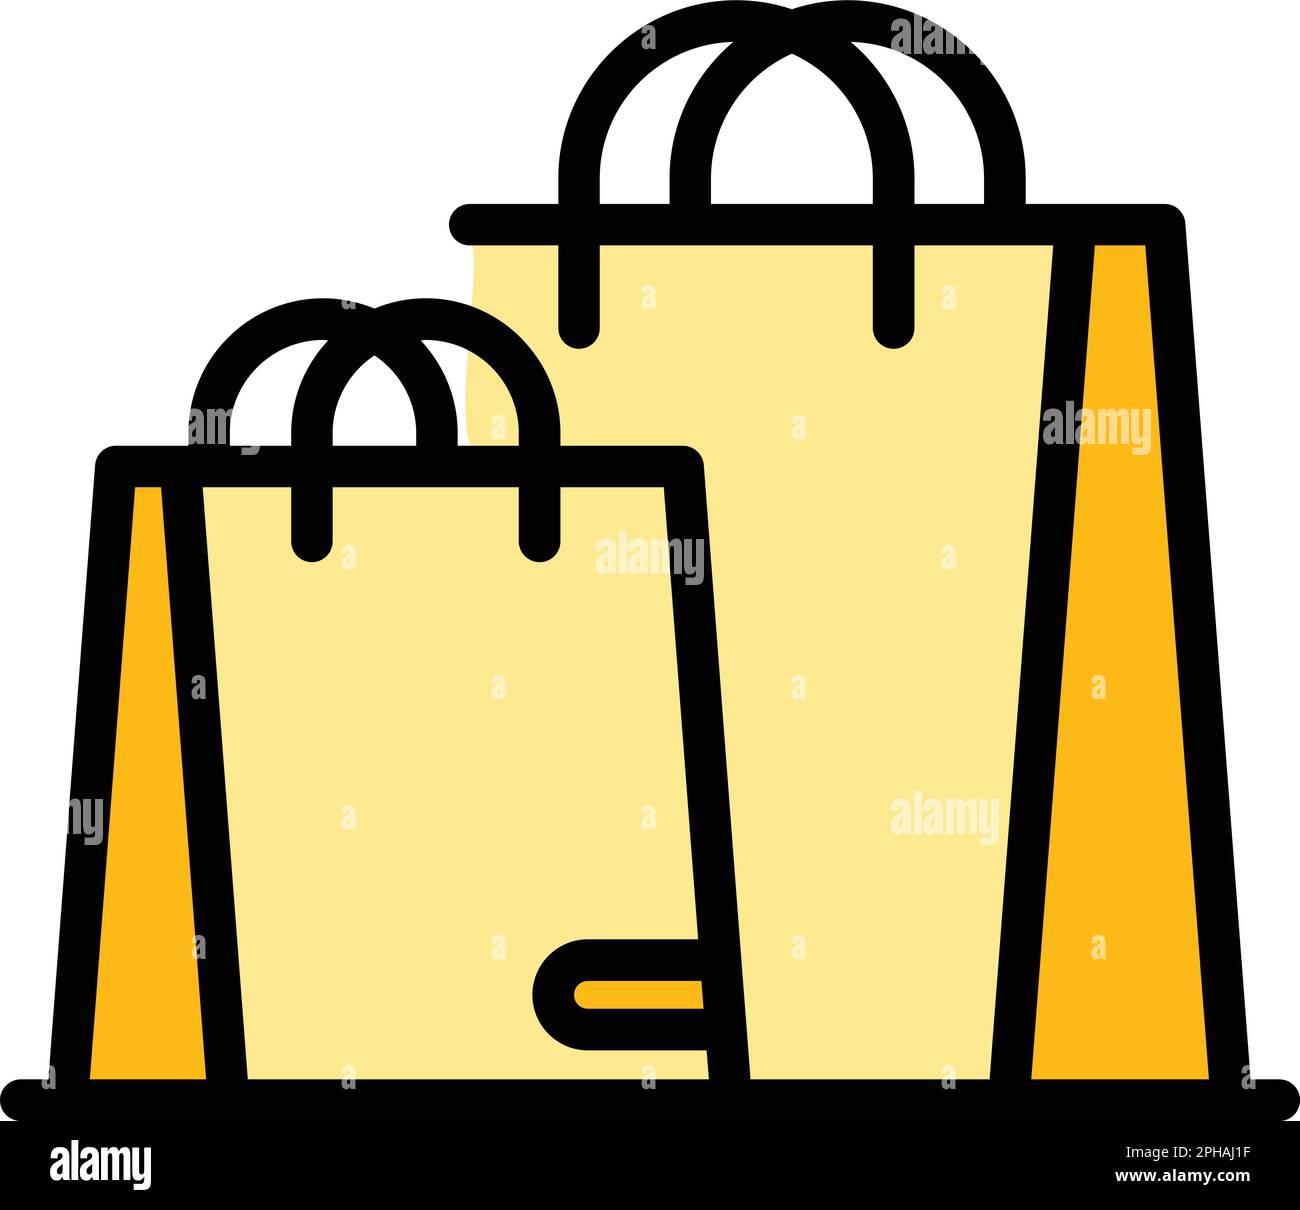 colorful shopping bags isolated on white background Stock Vector